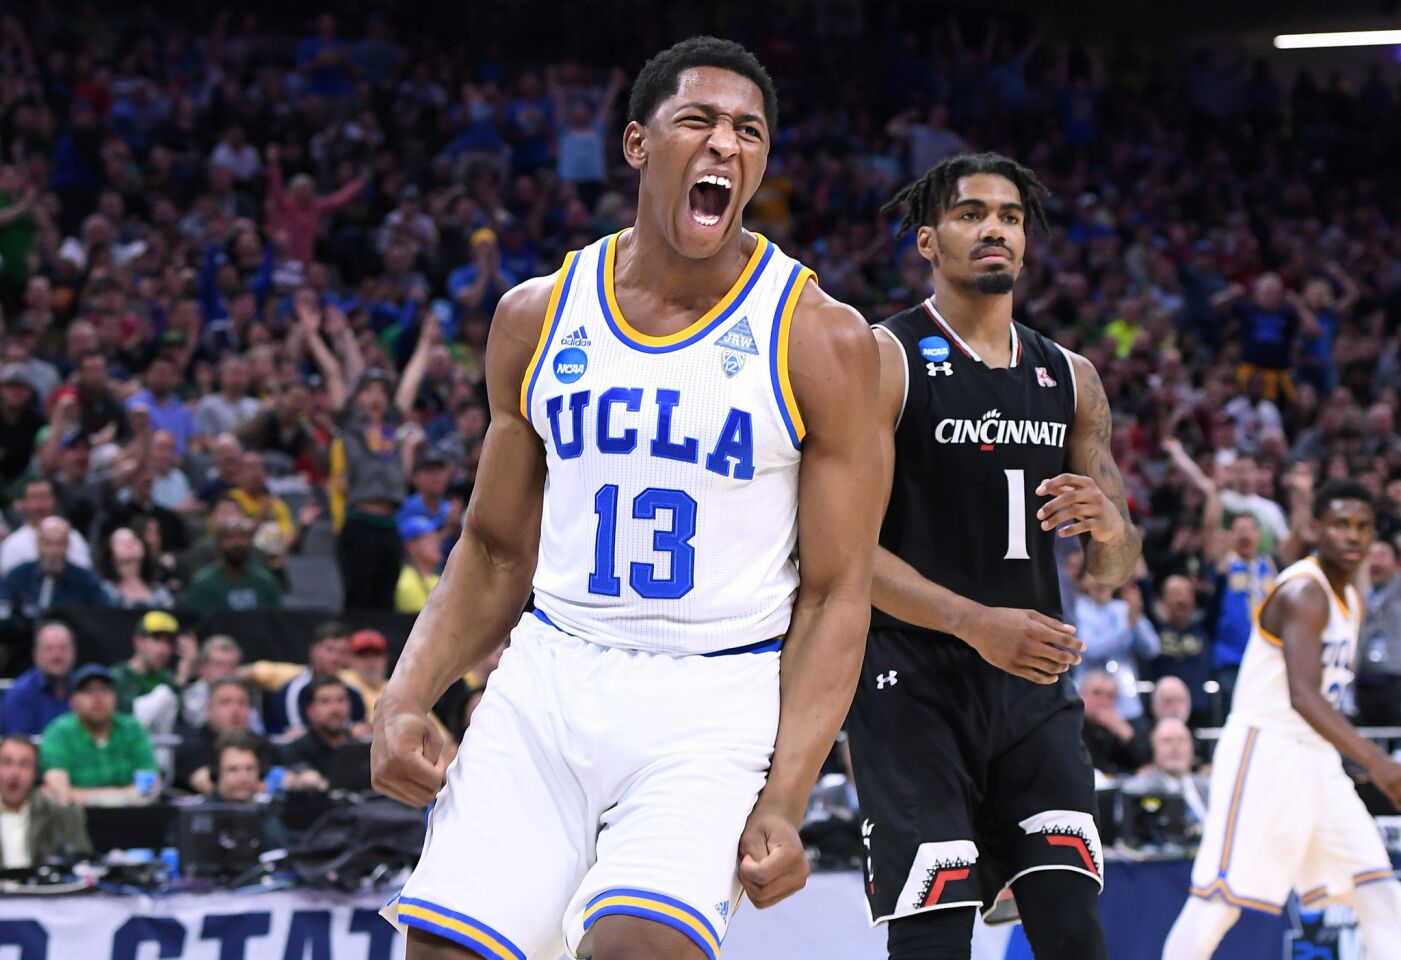 UCLAA forward Ike Anigbogu celebrates after his dunk in front of Cincinnati guard Jacob Evans during the second half.